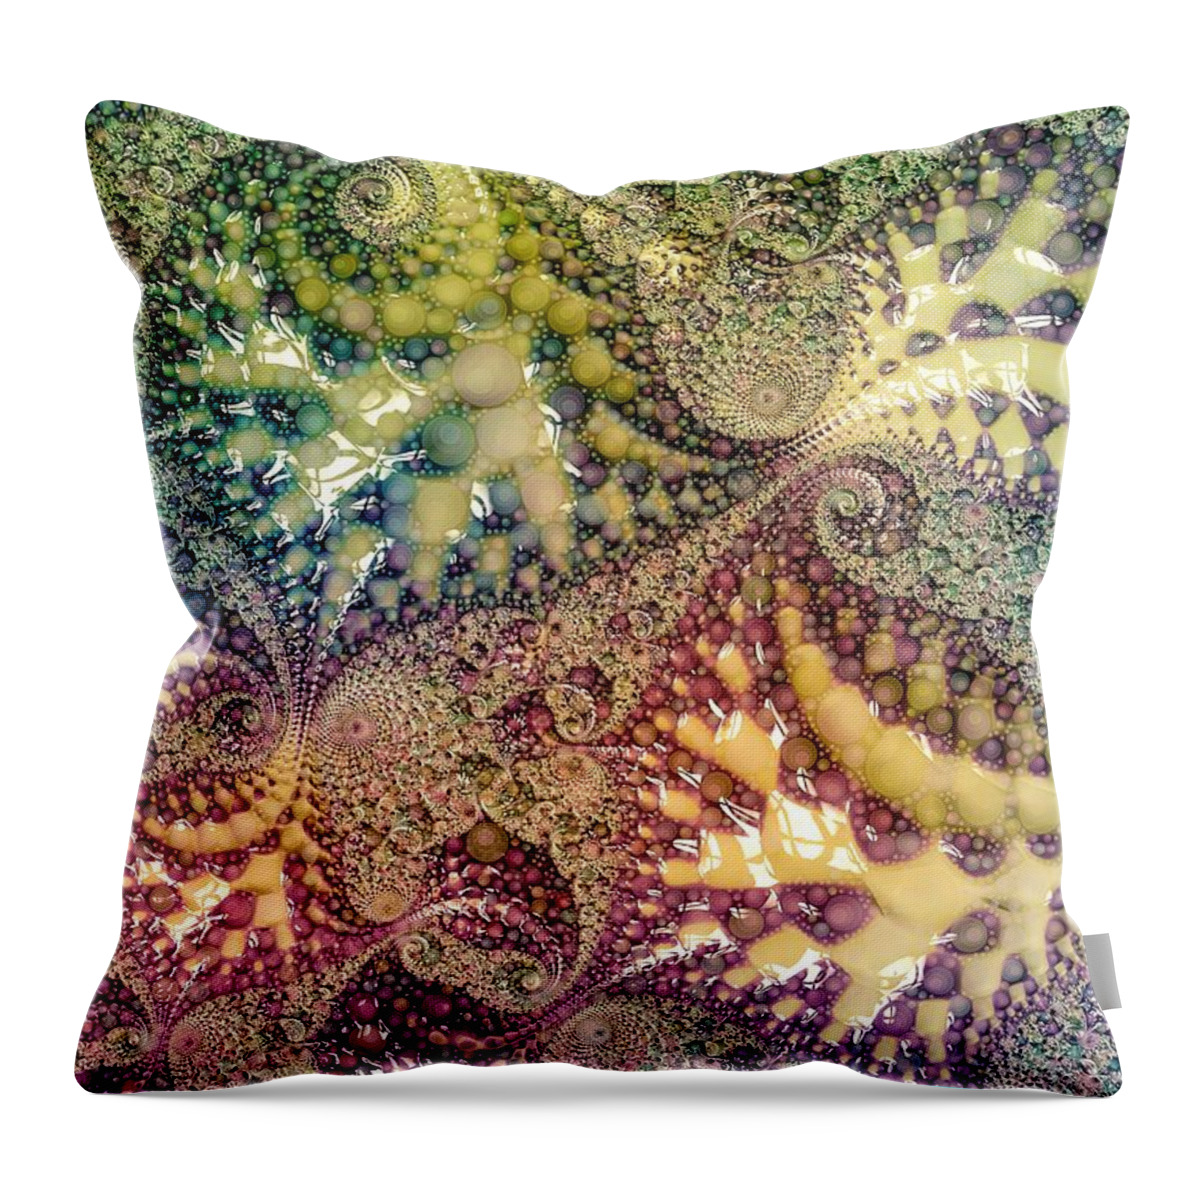 Primordial Soup Throw Pillow featuring the digital art Primordial Seafood Bisque by Susan Maxwell Schmidt